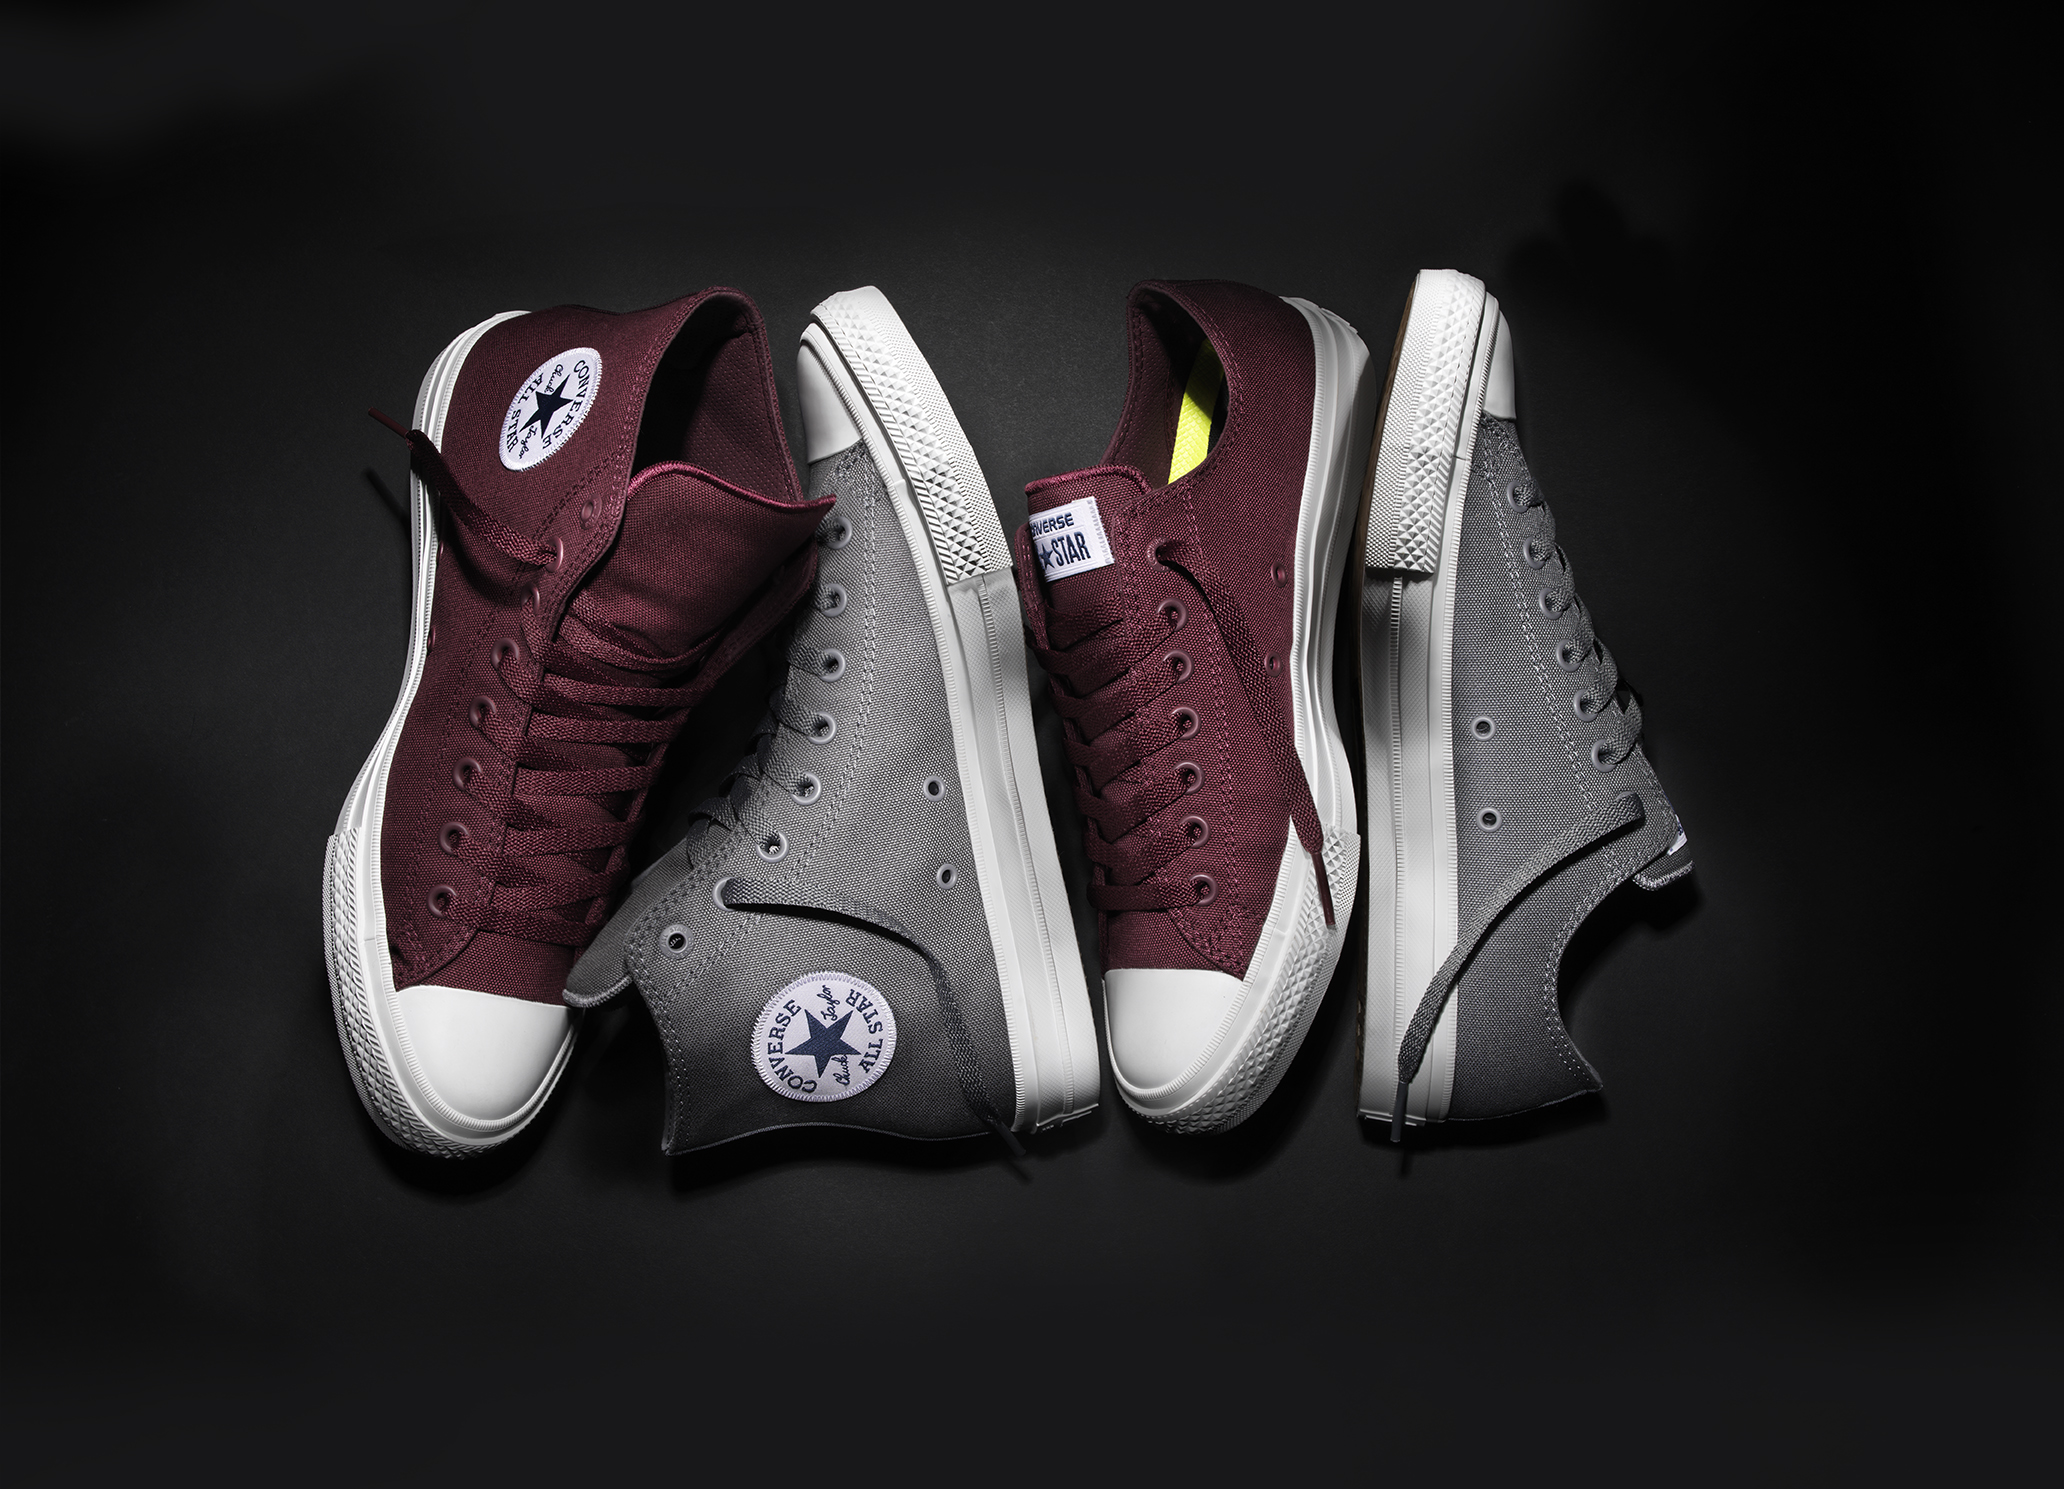 Chuck Taylor All Star shoes